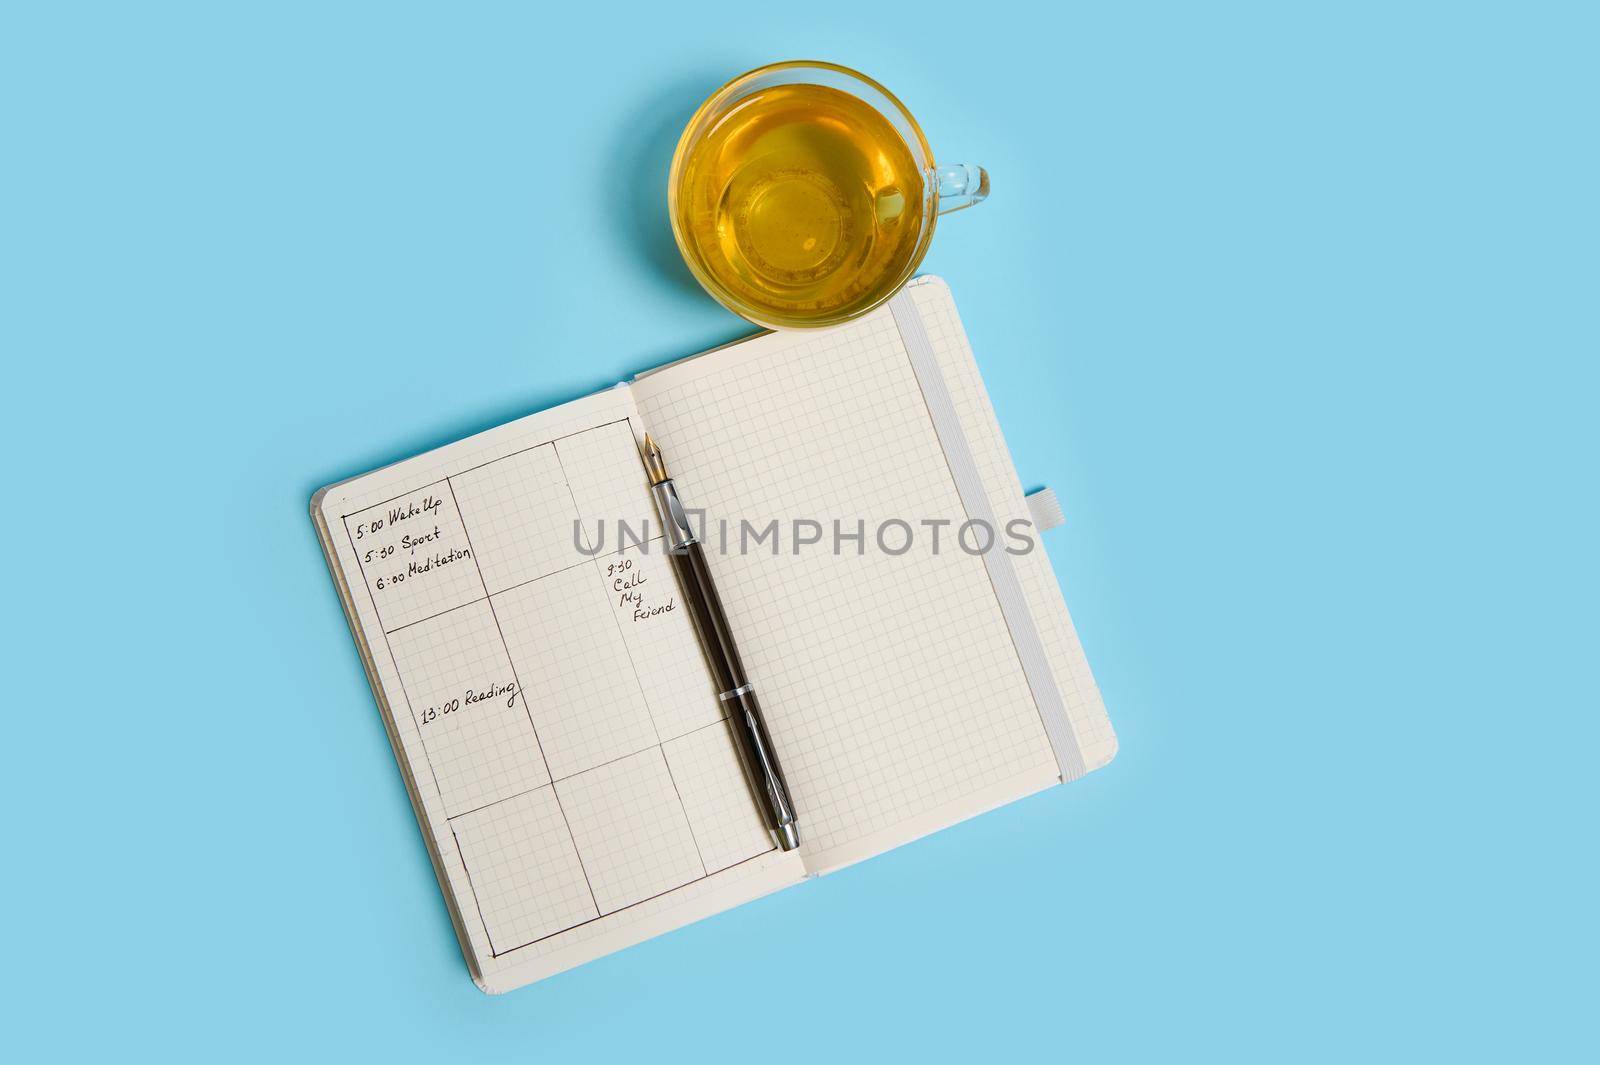 Flat lay composition of an open agenda with schedule, ink pen and transparent glass cup of tea lie on blue surface. Color background with copy space . Time management, deadline, schedule concept